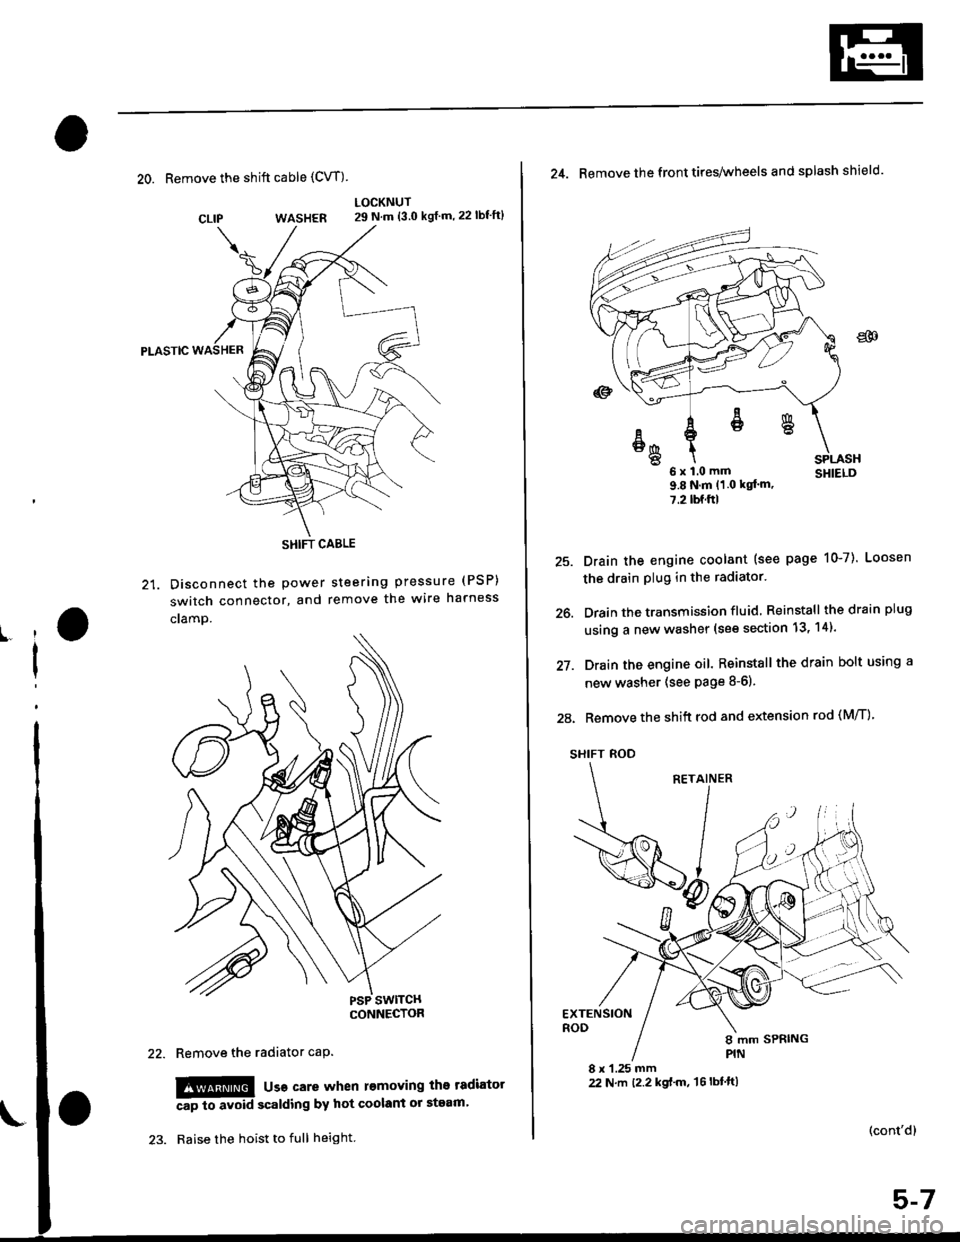 HONDA CIVIC 1997 6.G Repair Manual 20. Remove the shift cable (CVT)
WASHER
Pt-Aslc
21. Disconnect the Power
switch connector, and
cramp.
LOCKNUT29 N.m {3.0 kgf m,22lbfft}
steering pressure (PSP)
remove the wire harness
CLIP
ll
I
Remov